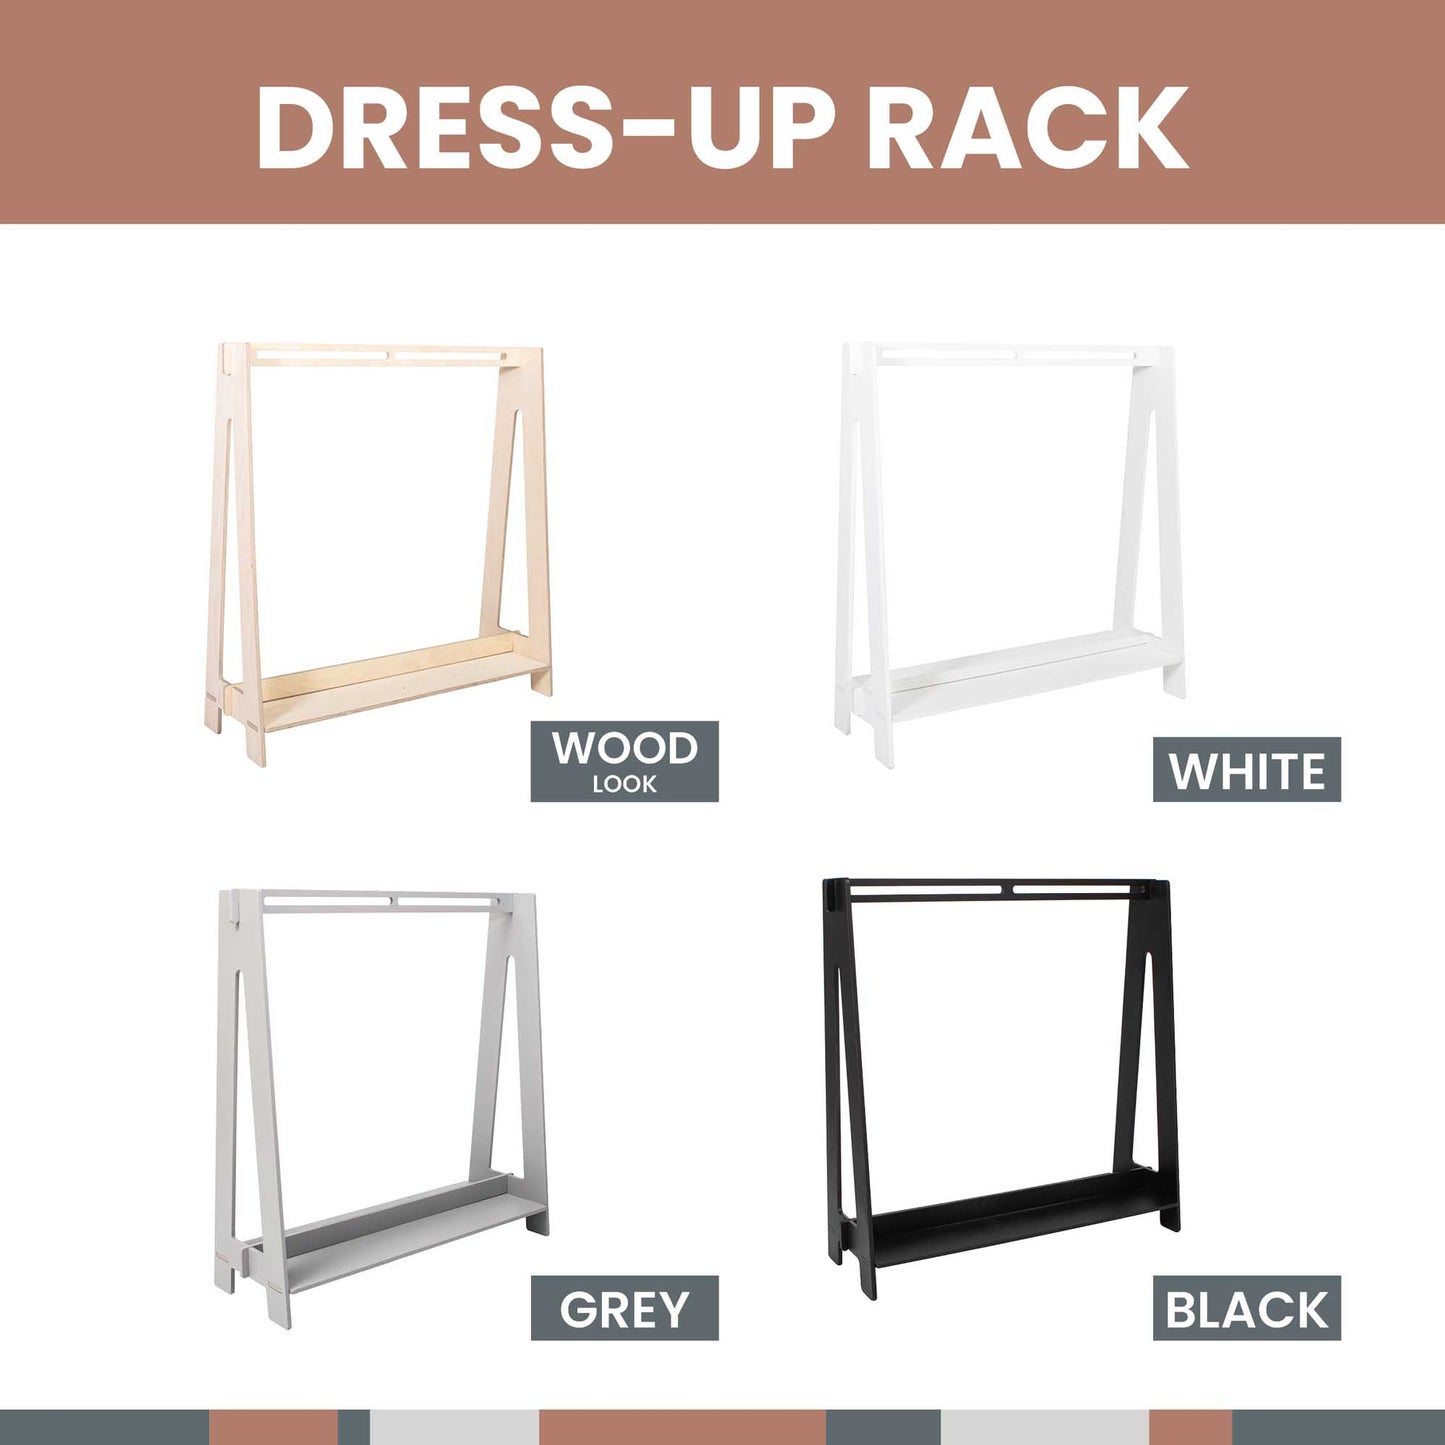 Compact wooden kids' clothing rack for children's dress-up.